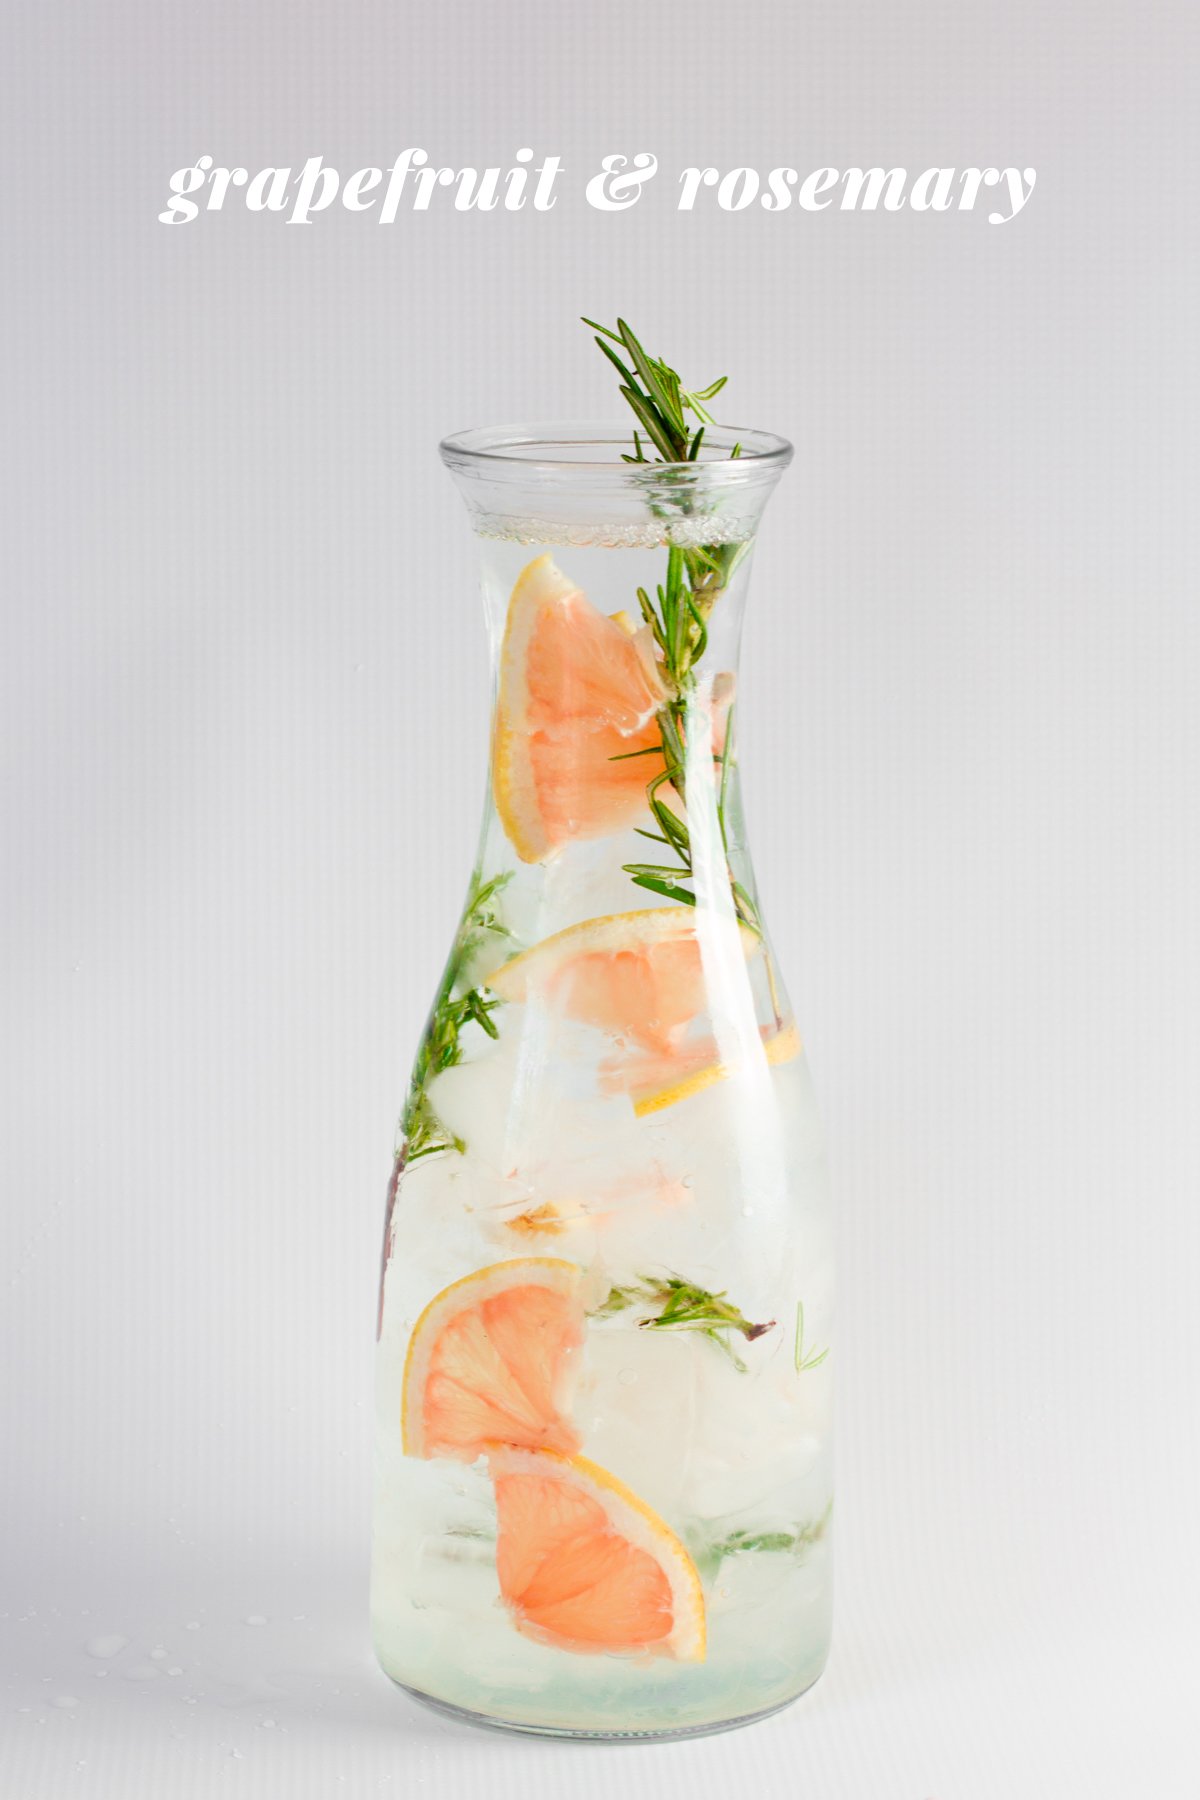 Grapefruit and rosemary infused water is displayed in a glass carafe. A text overlay reads, "Grapefruit & Rosemary."